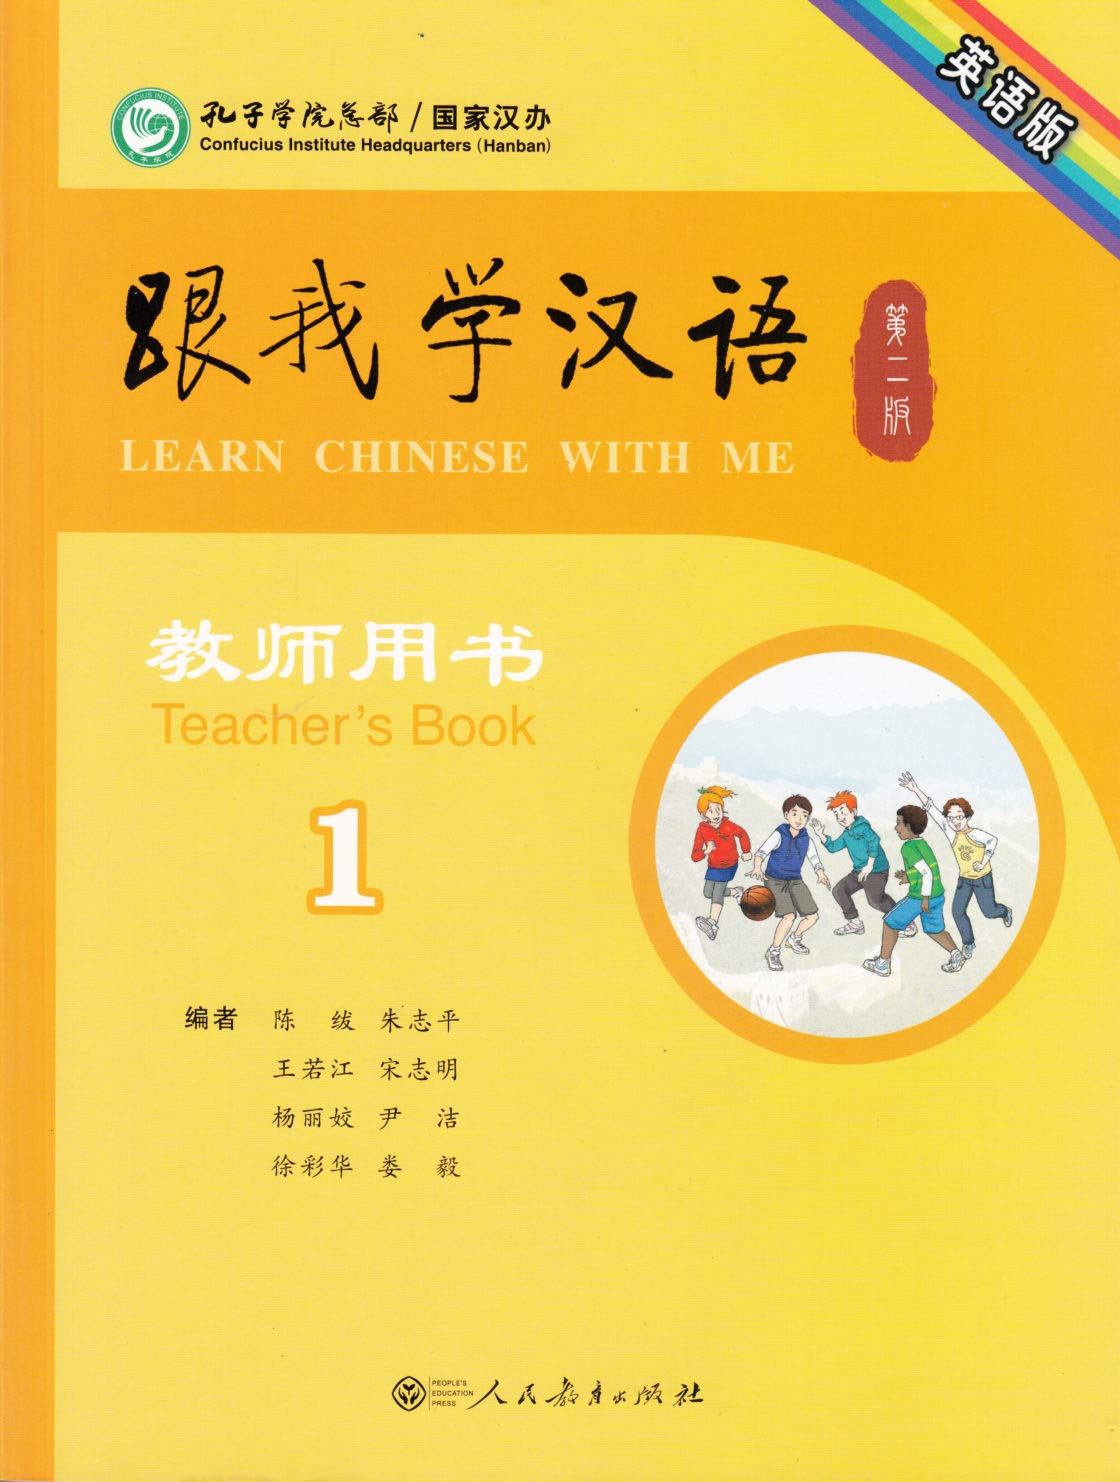 Learn Chinese with Me (2nd Edition) Vol. 1 - Teacher's Book